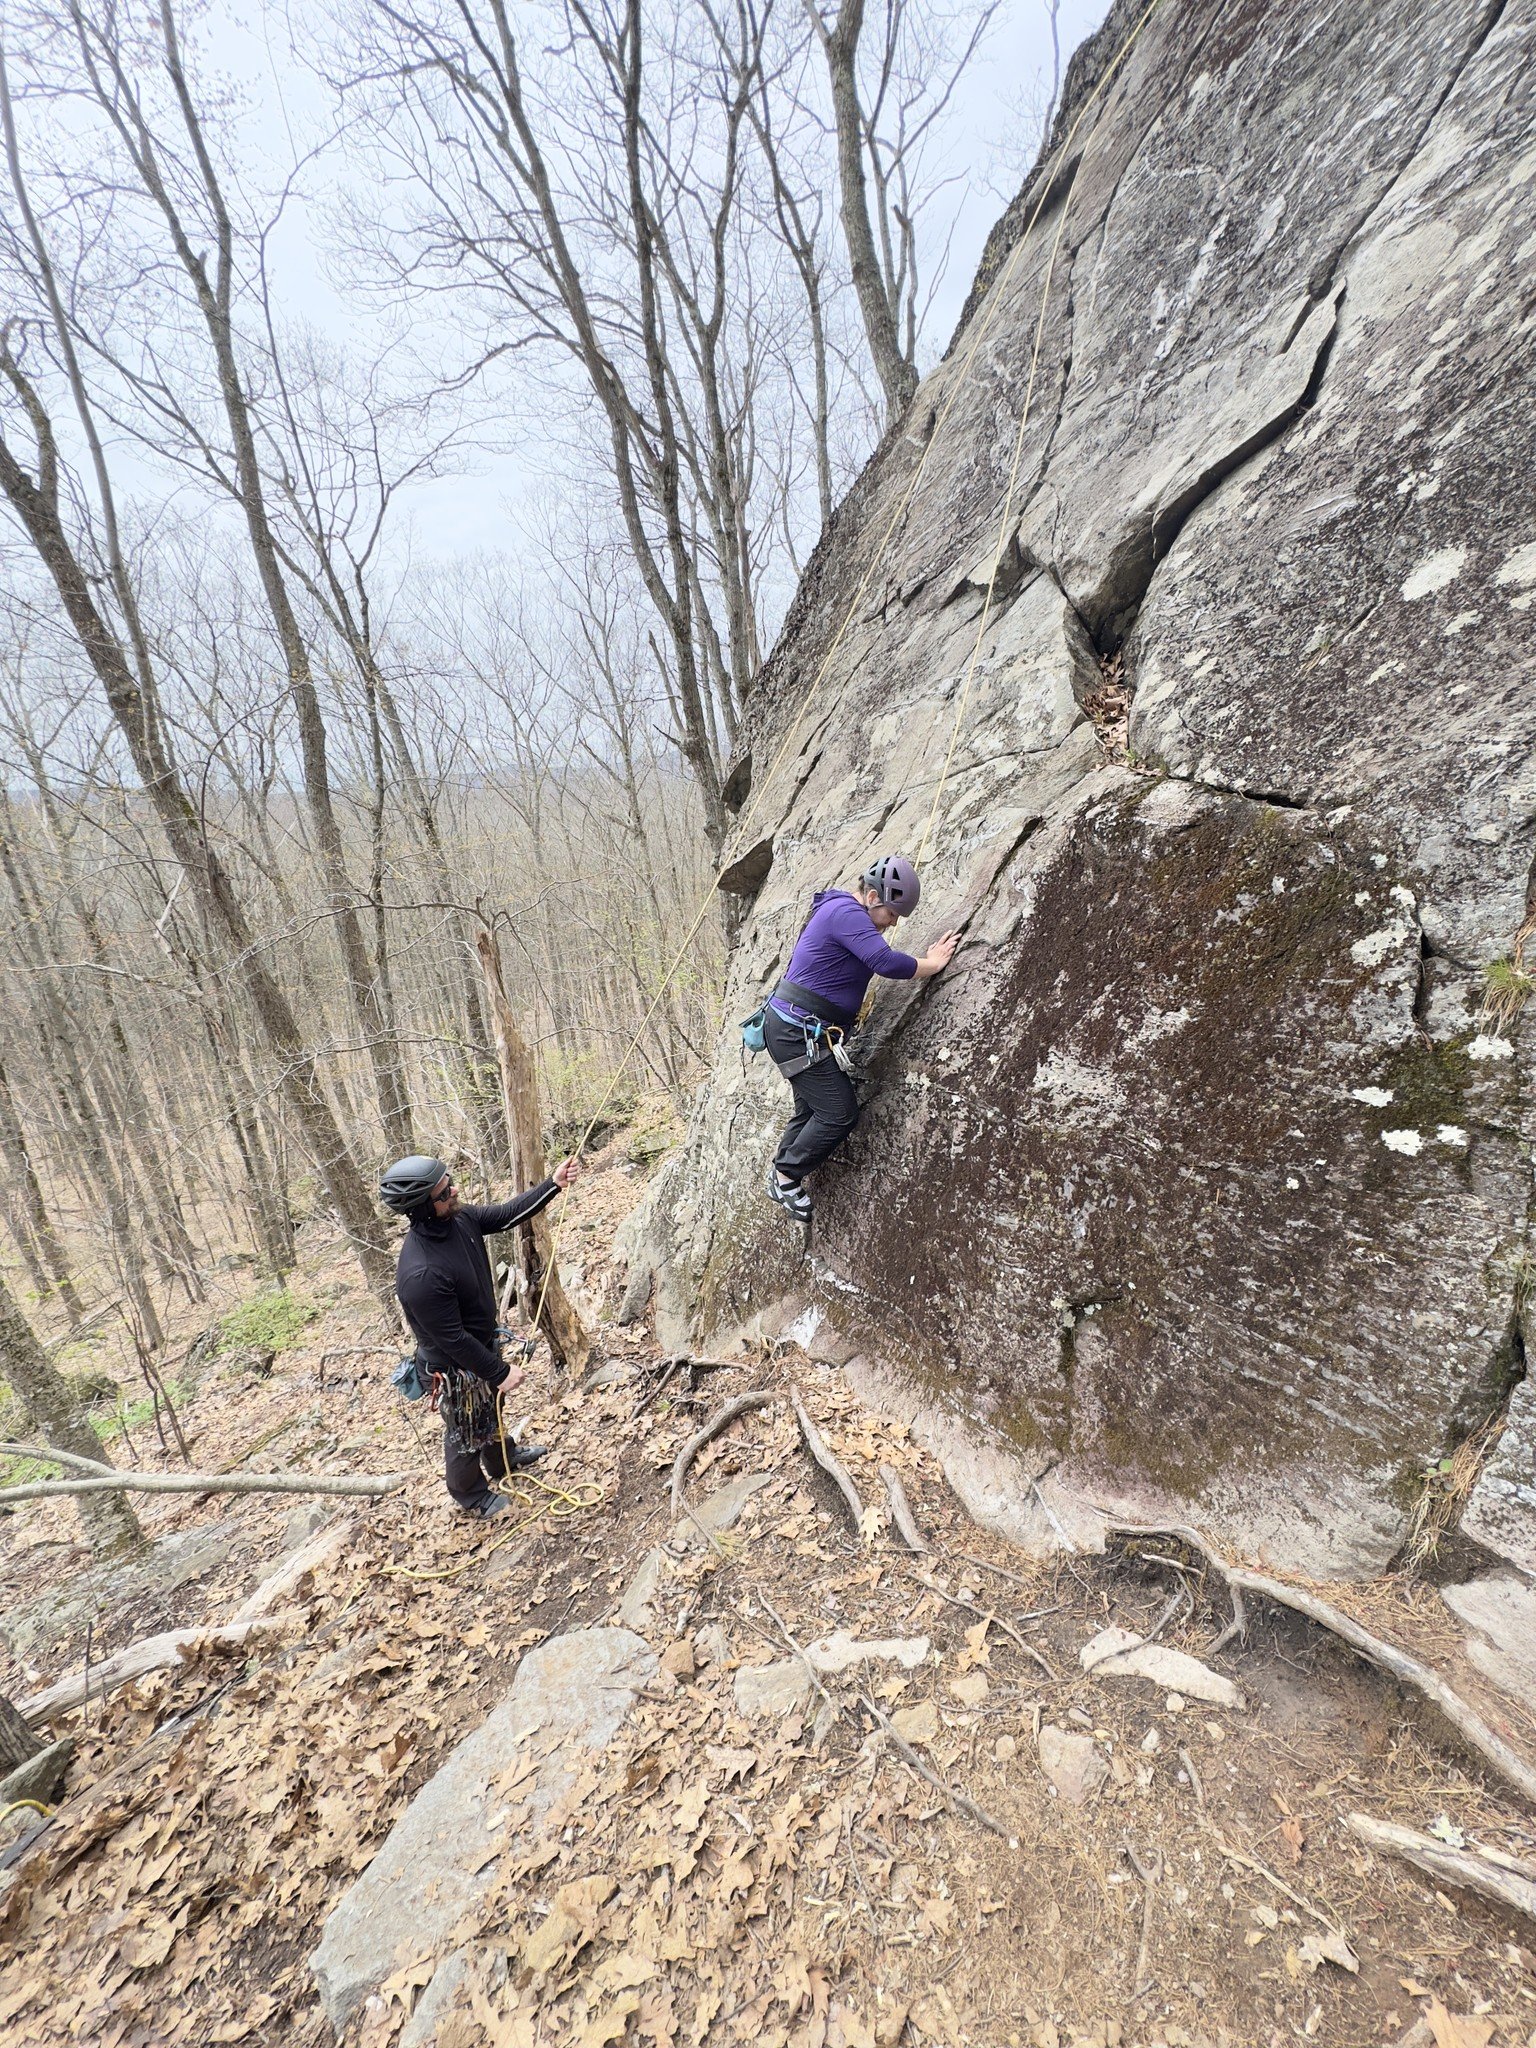 🌲 Crafting Maine Climbing Adventures, Not Trends 🧗&zwj;♂️

At Equinox Guiding Services, we're all about authenticity and connection with nature. Our mission? To create unforgettable climbing experiences in the heart of Maine's stunning landscapes. 